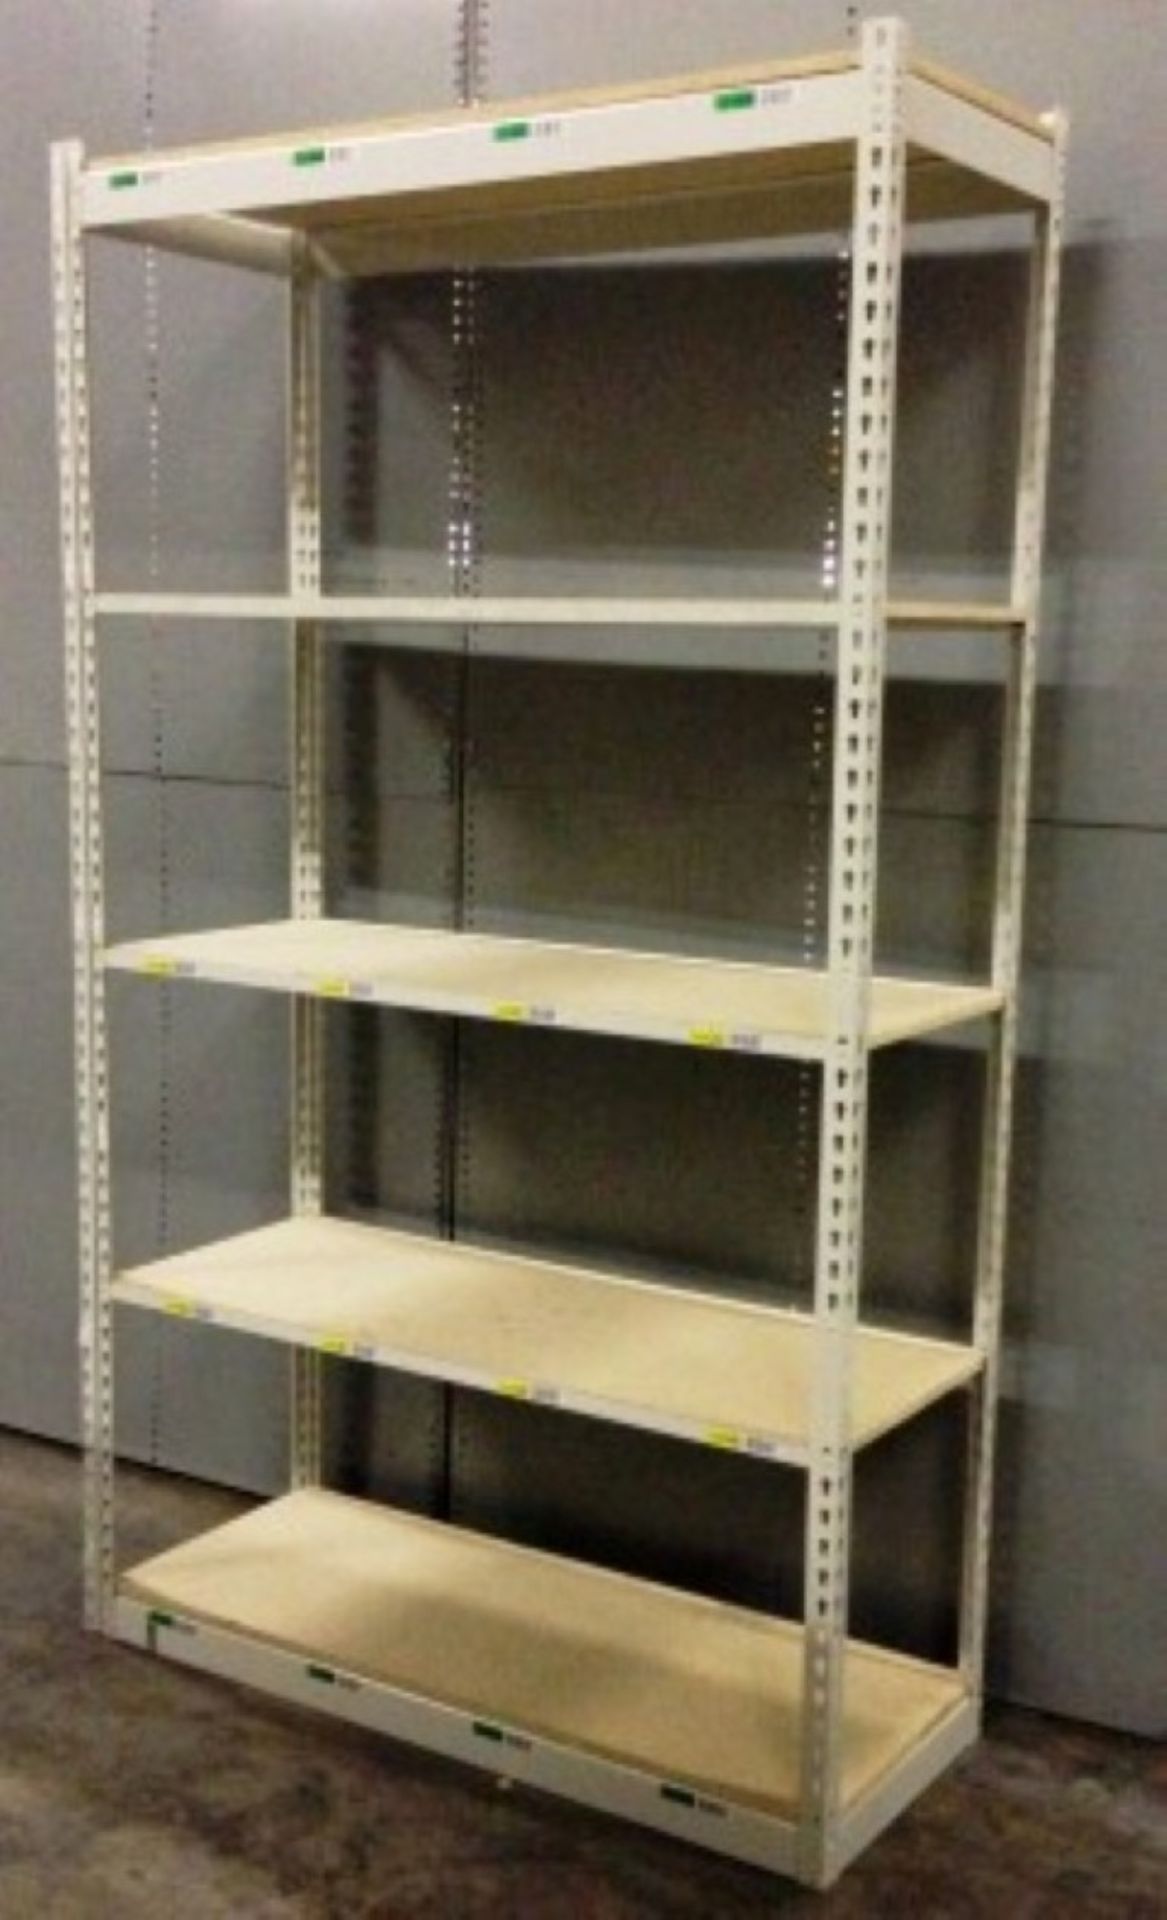 ONE LOT OF 20 SECTIONS OF RIVETIER INDUSTRIAL SHELVING